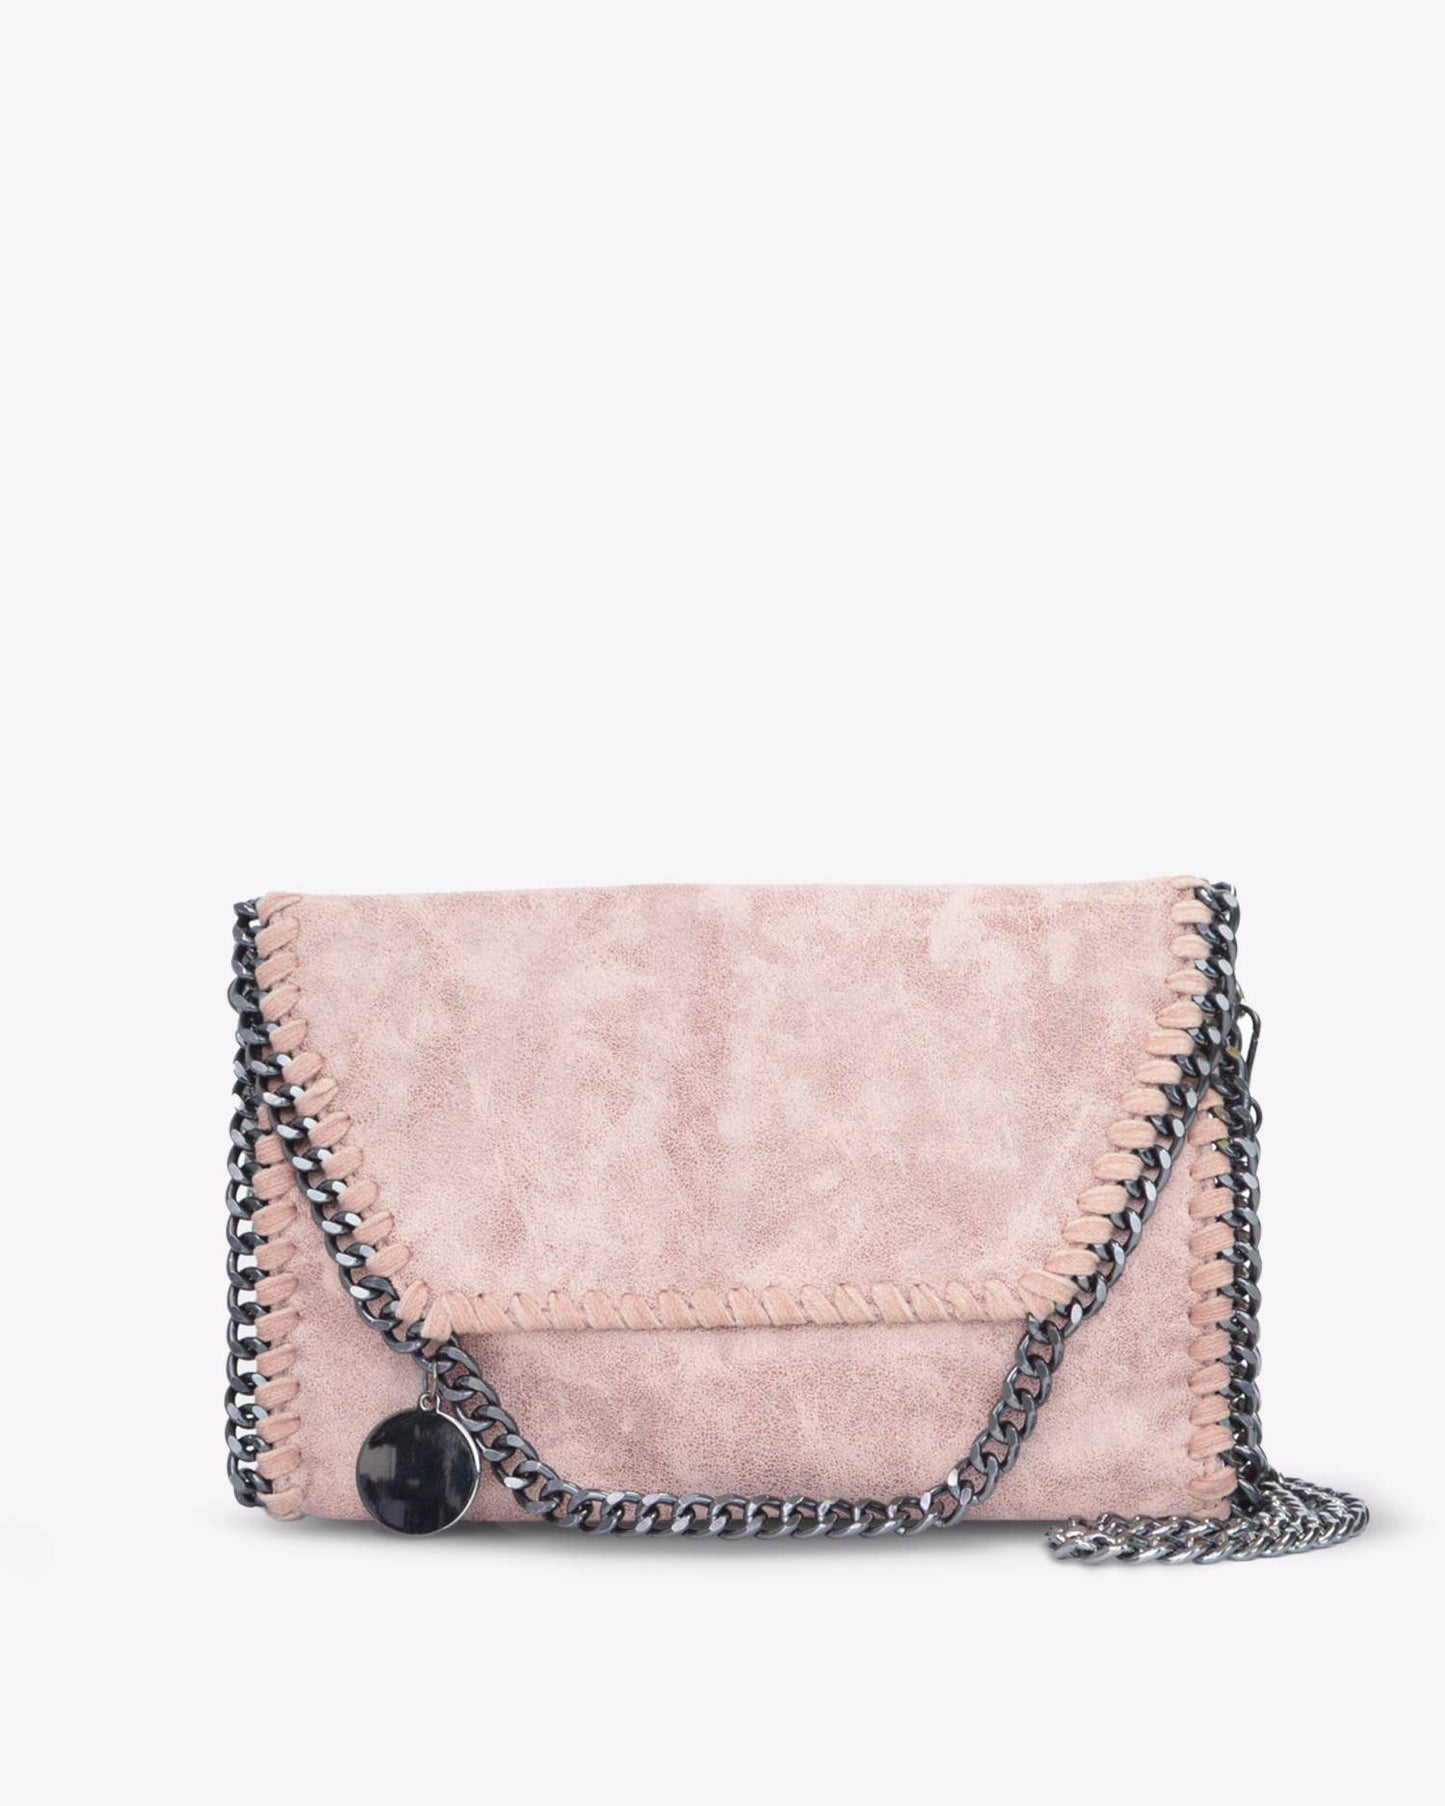 MERSI by The Vegan Warehouse - Alicia Crossbody - Pink (Limited Edition)